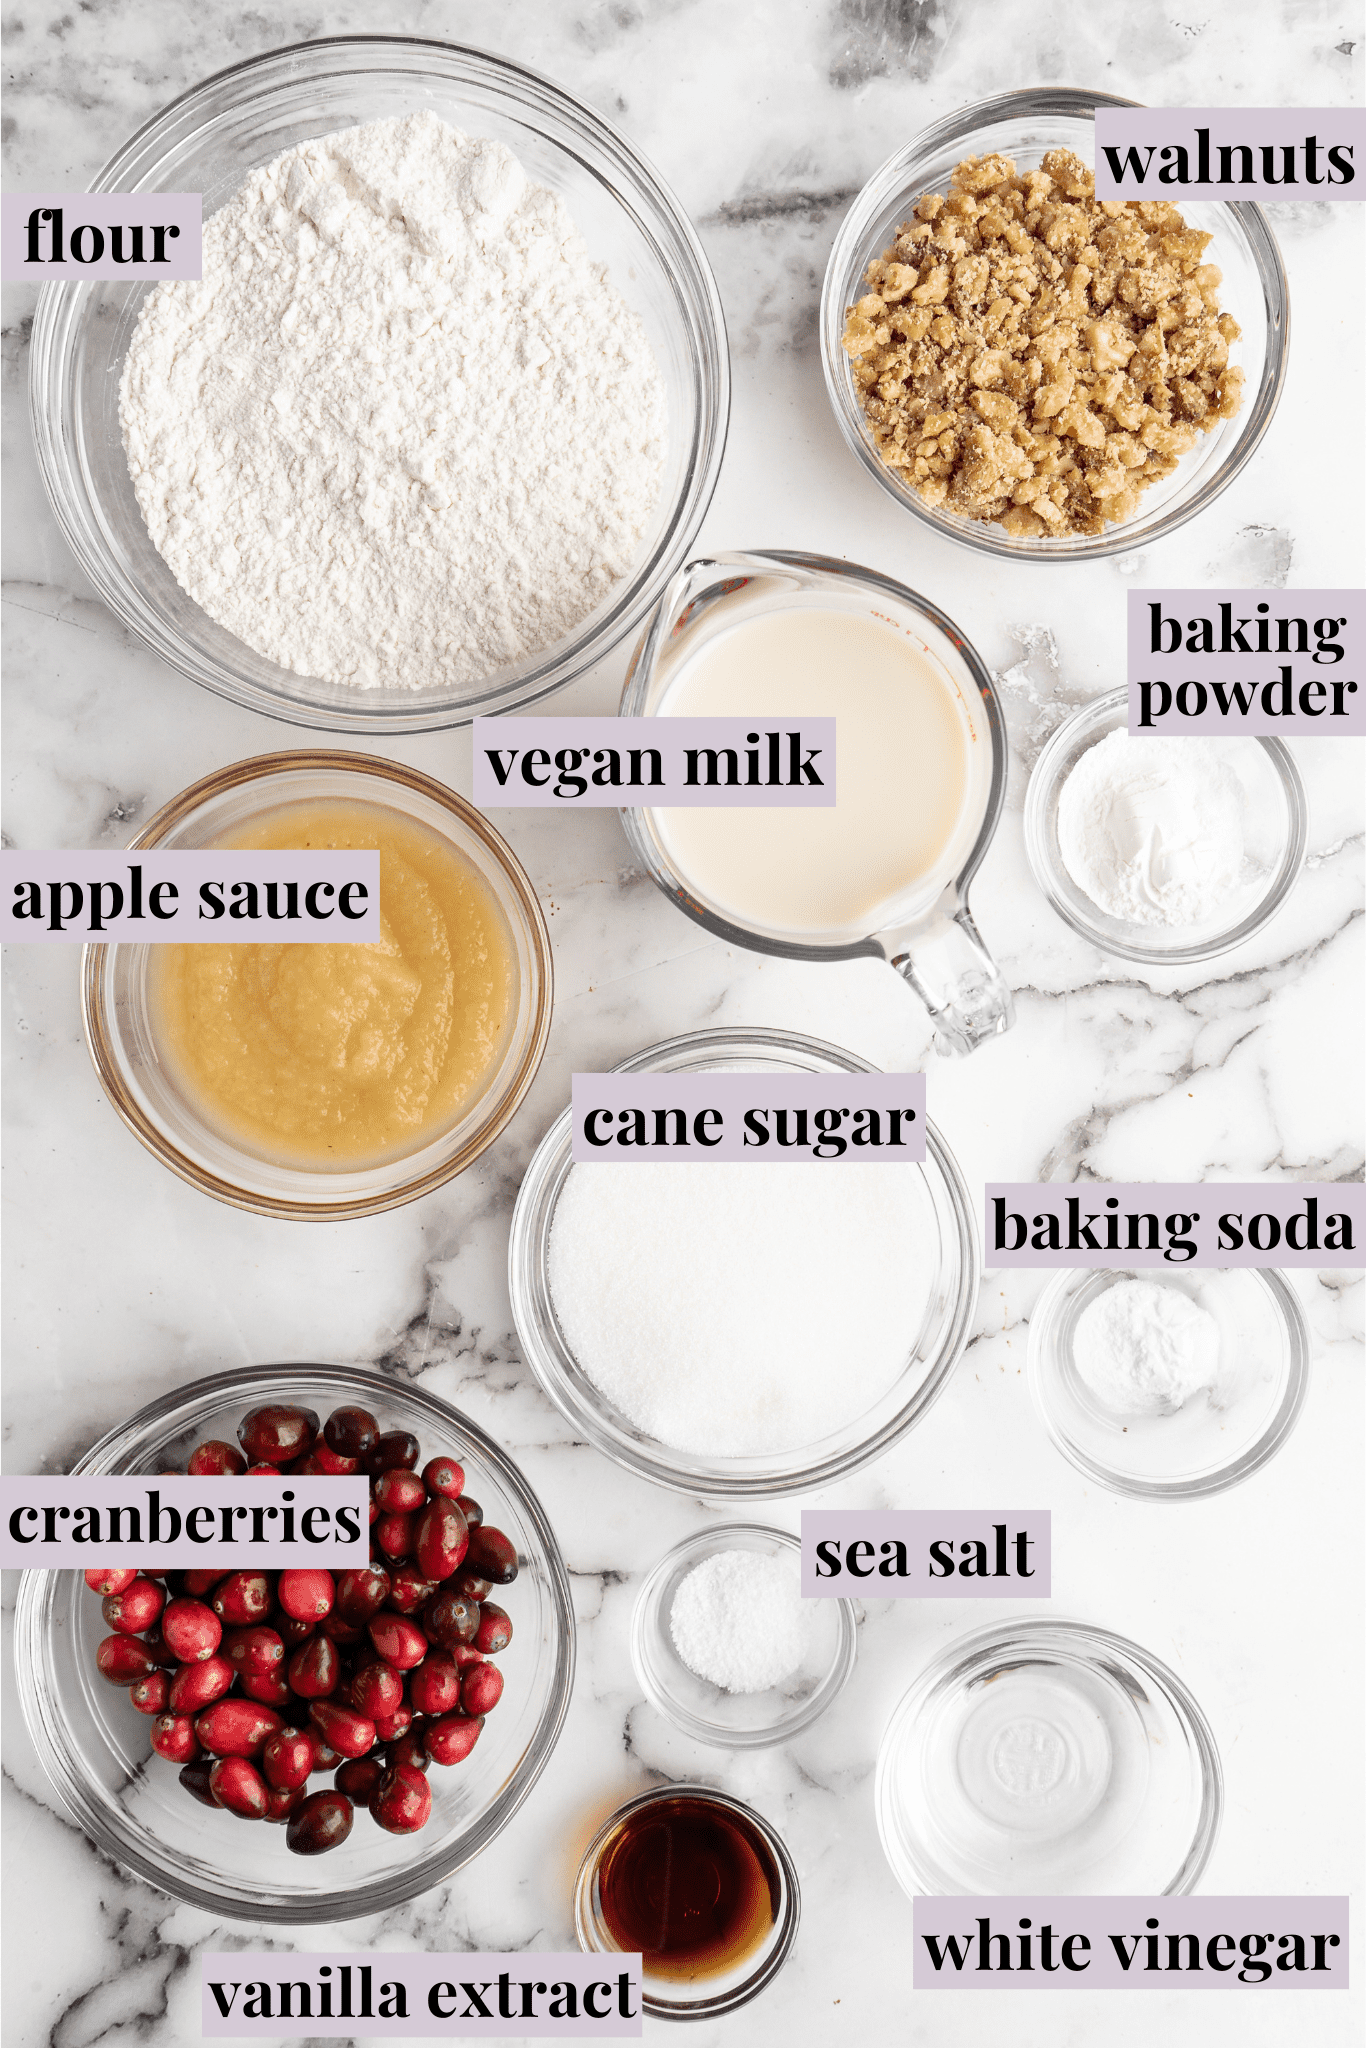 Overhead view of the labeled ingredients for cranberry walnut bread: a bowl of flour, a bowl of walnuts, a bowl of applesauce, a bowl of cranberries, a bowl of vegan milk, a bowl of cane sugar, a bowl of baking powder, a bowl of baking soda, a bowl of salt, a bowl of white vinegar, and a bowl of vanilla extract